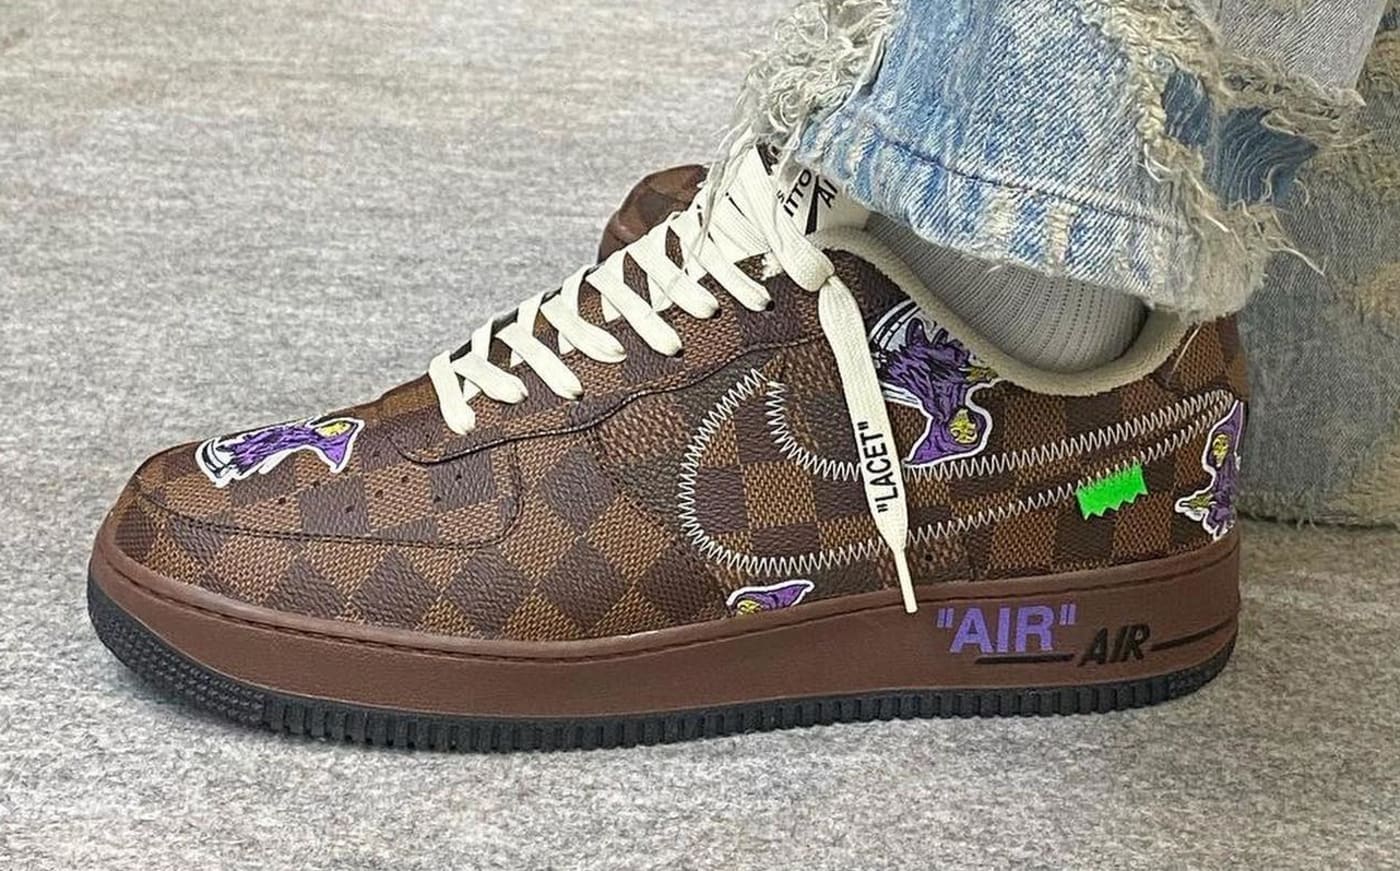 Every Louis Vuitton x Nike Force 1 Colorway So Far | Complex